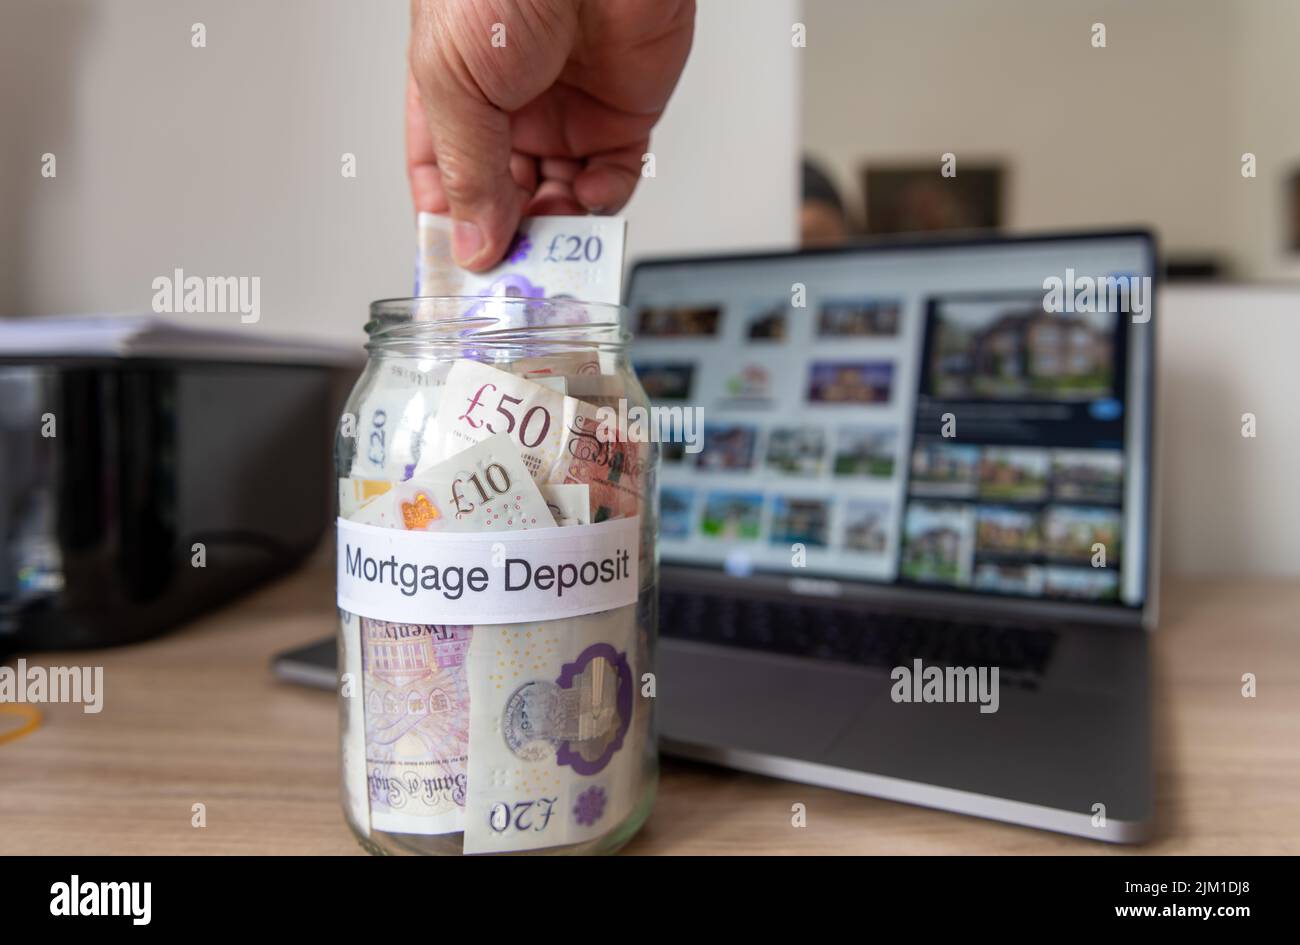 A person saving money towards a mortgage deposit in order to get on the property ladder and buy a home. Stock Photo